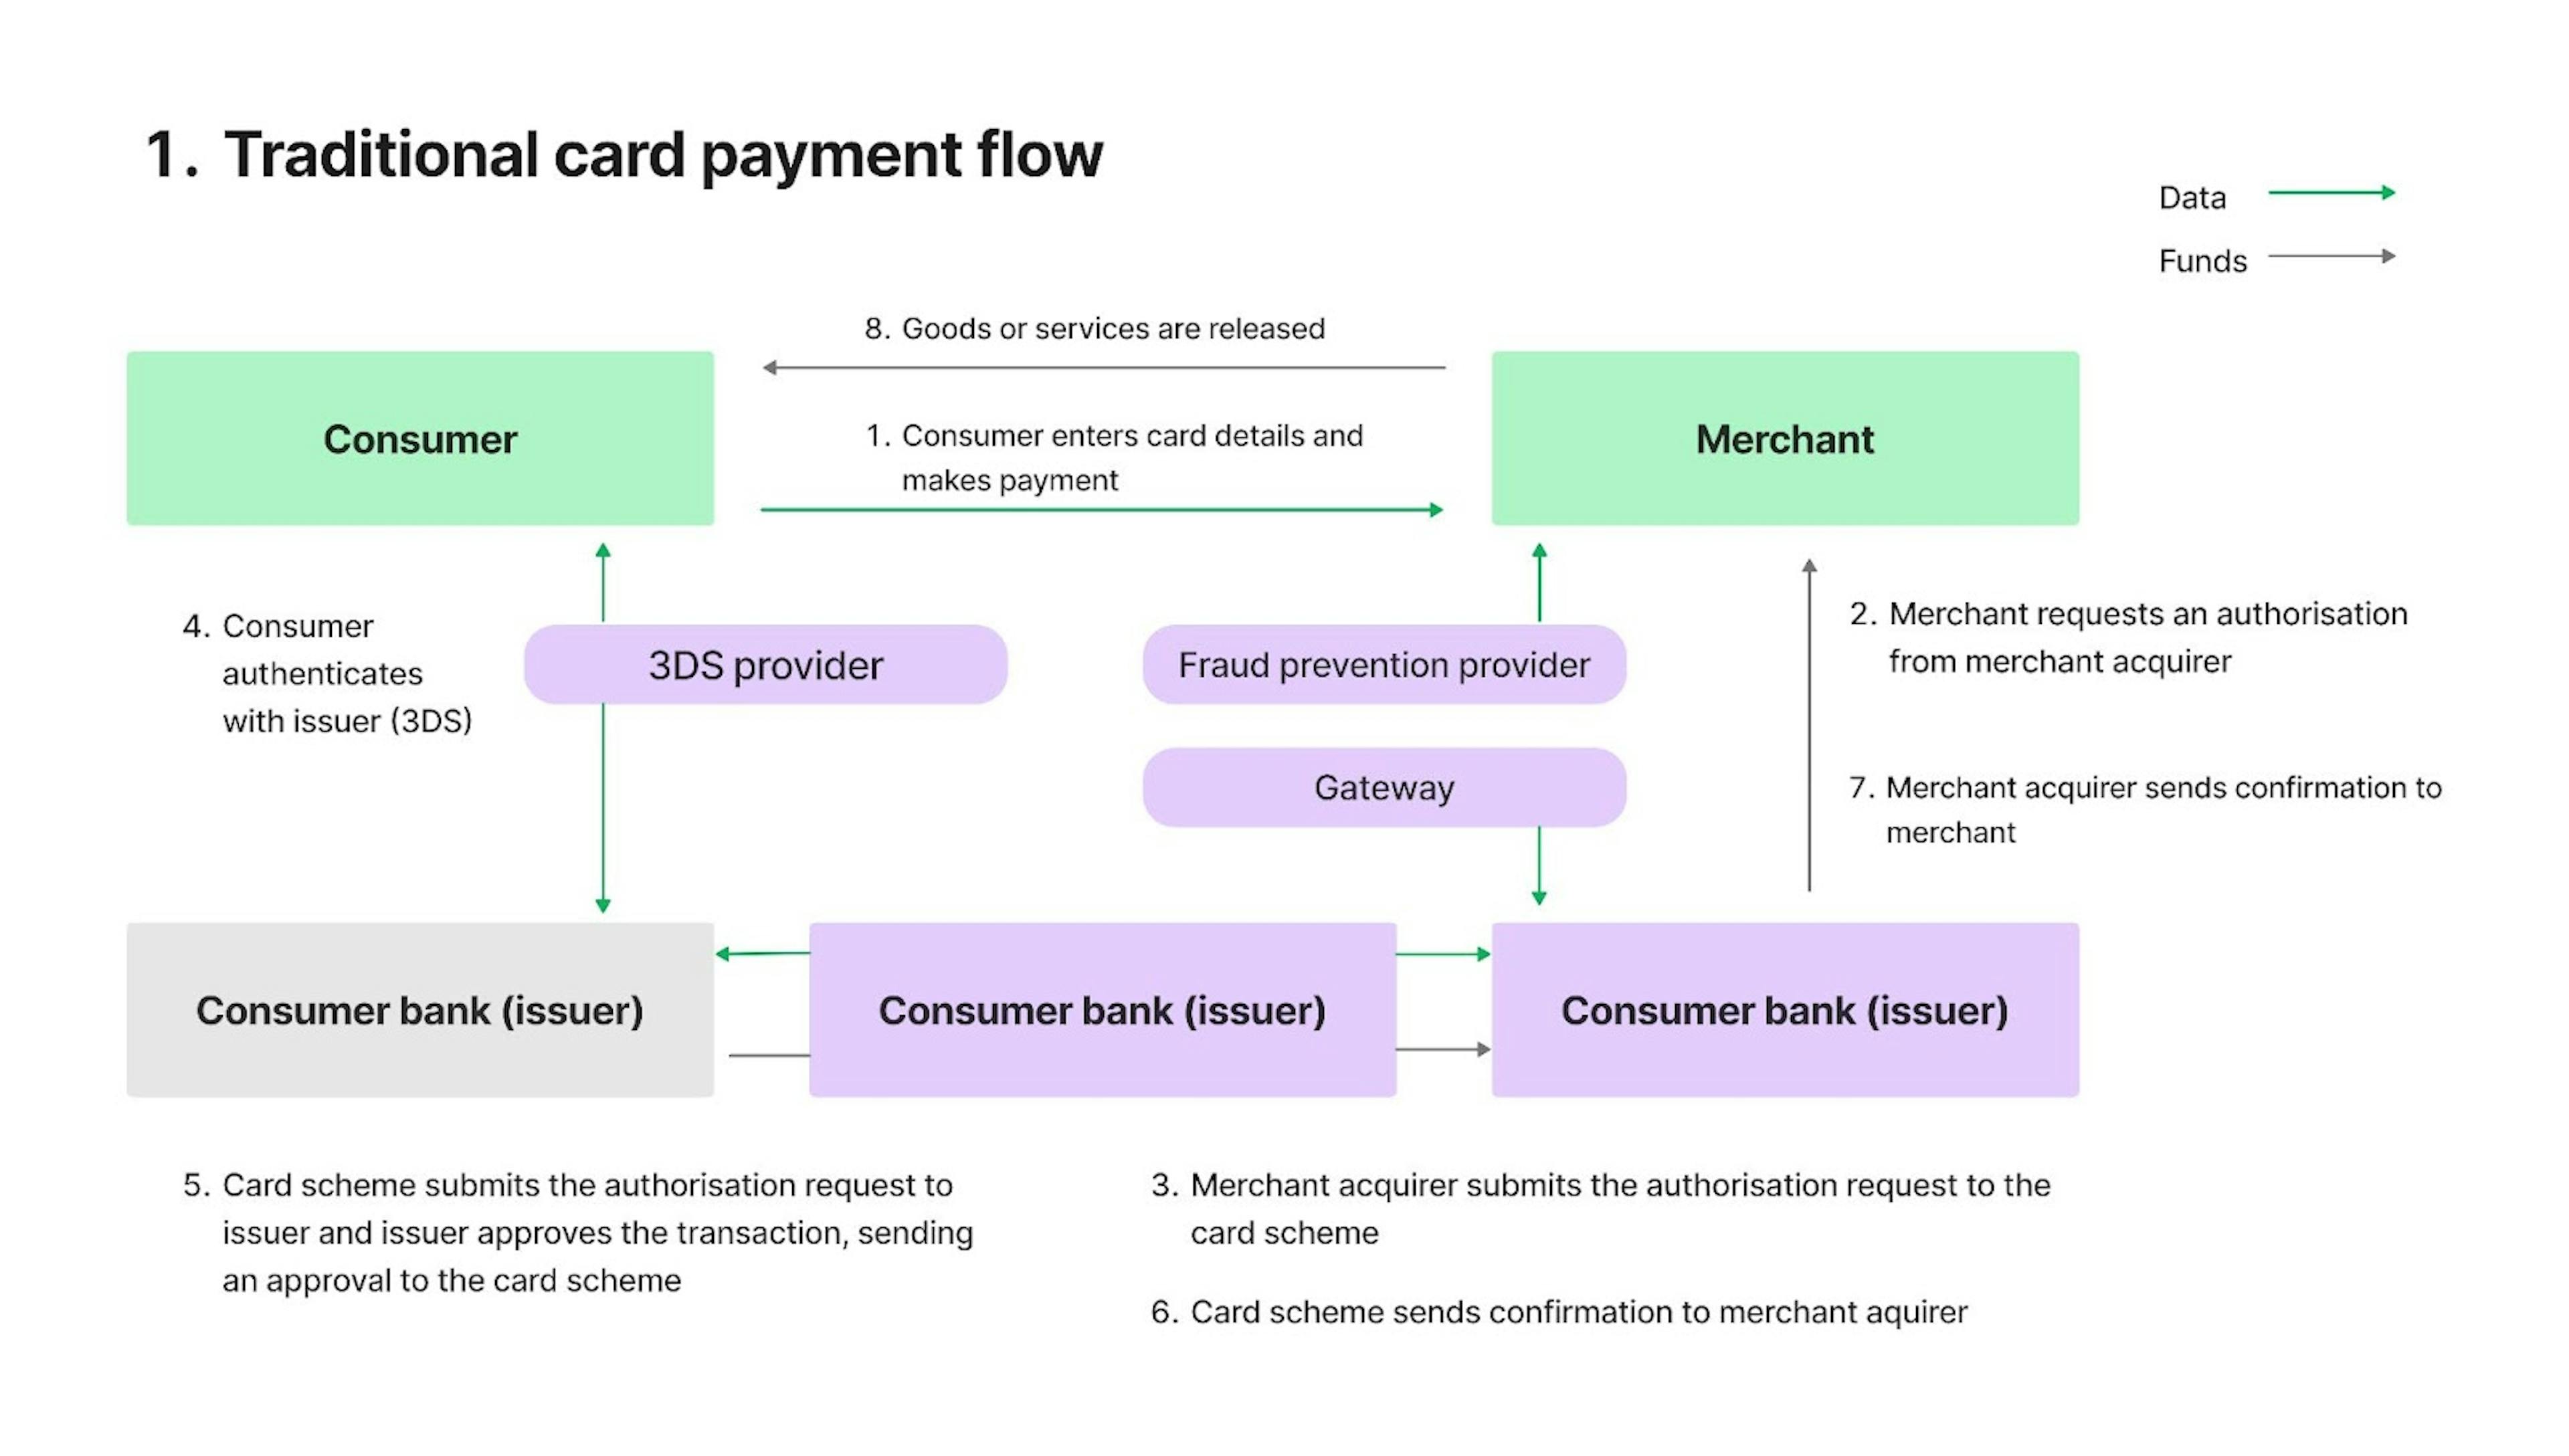 Traditional card payment flow